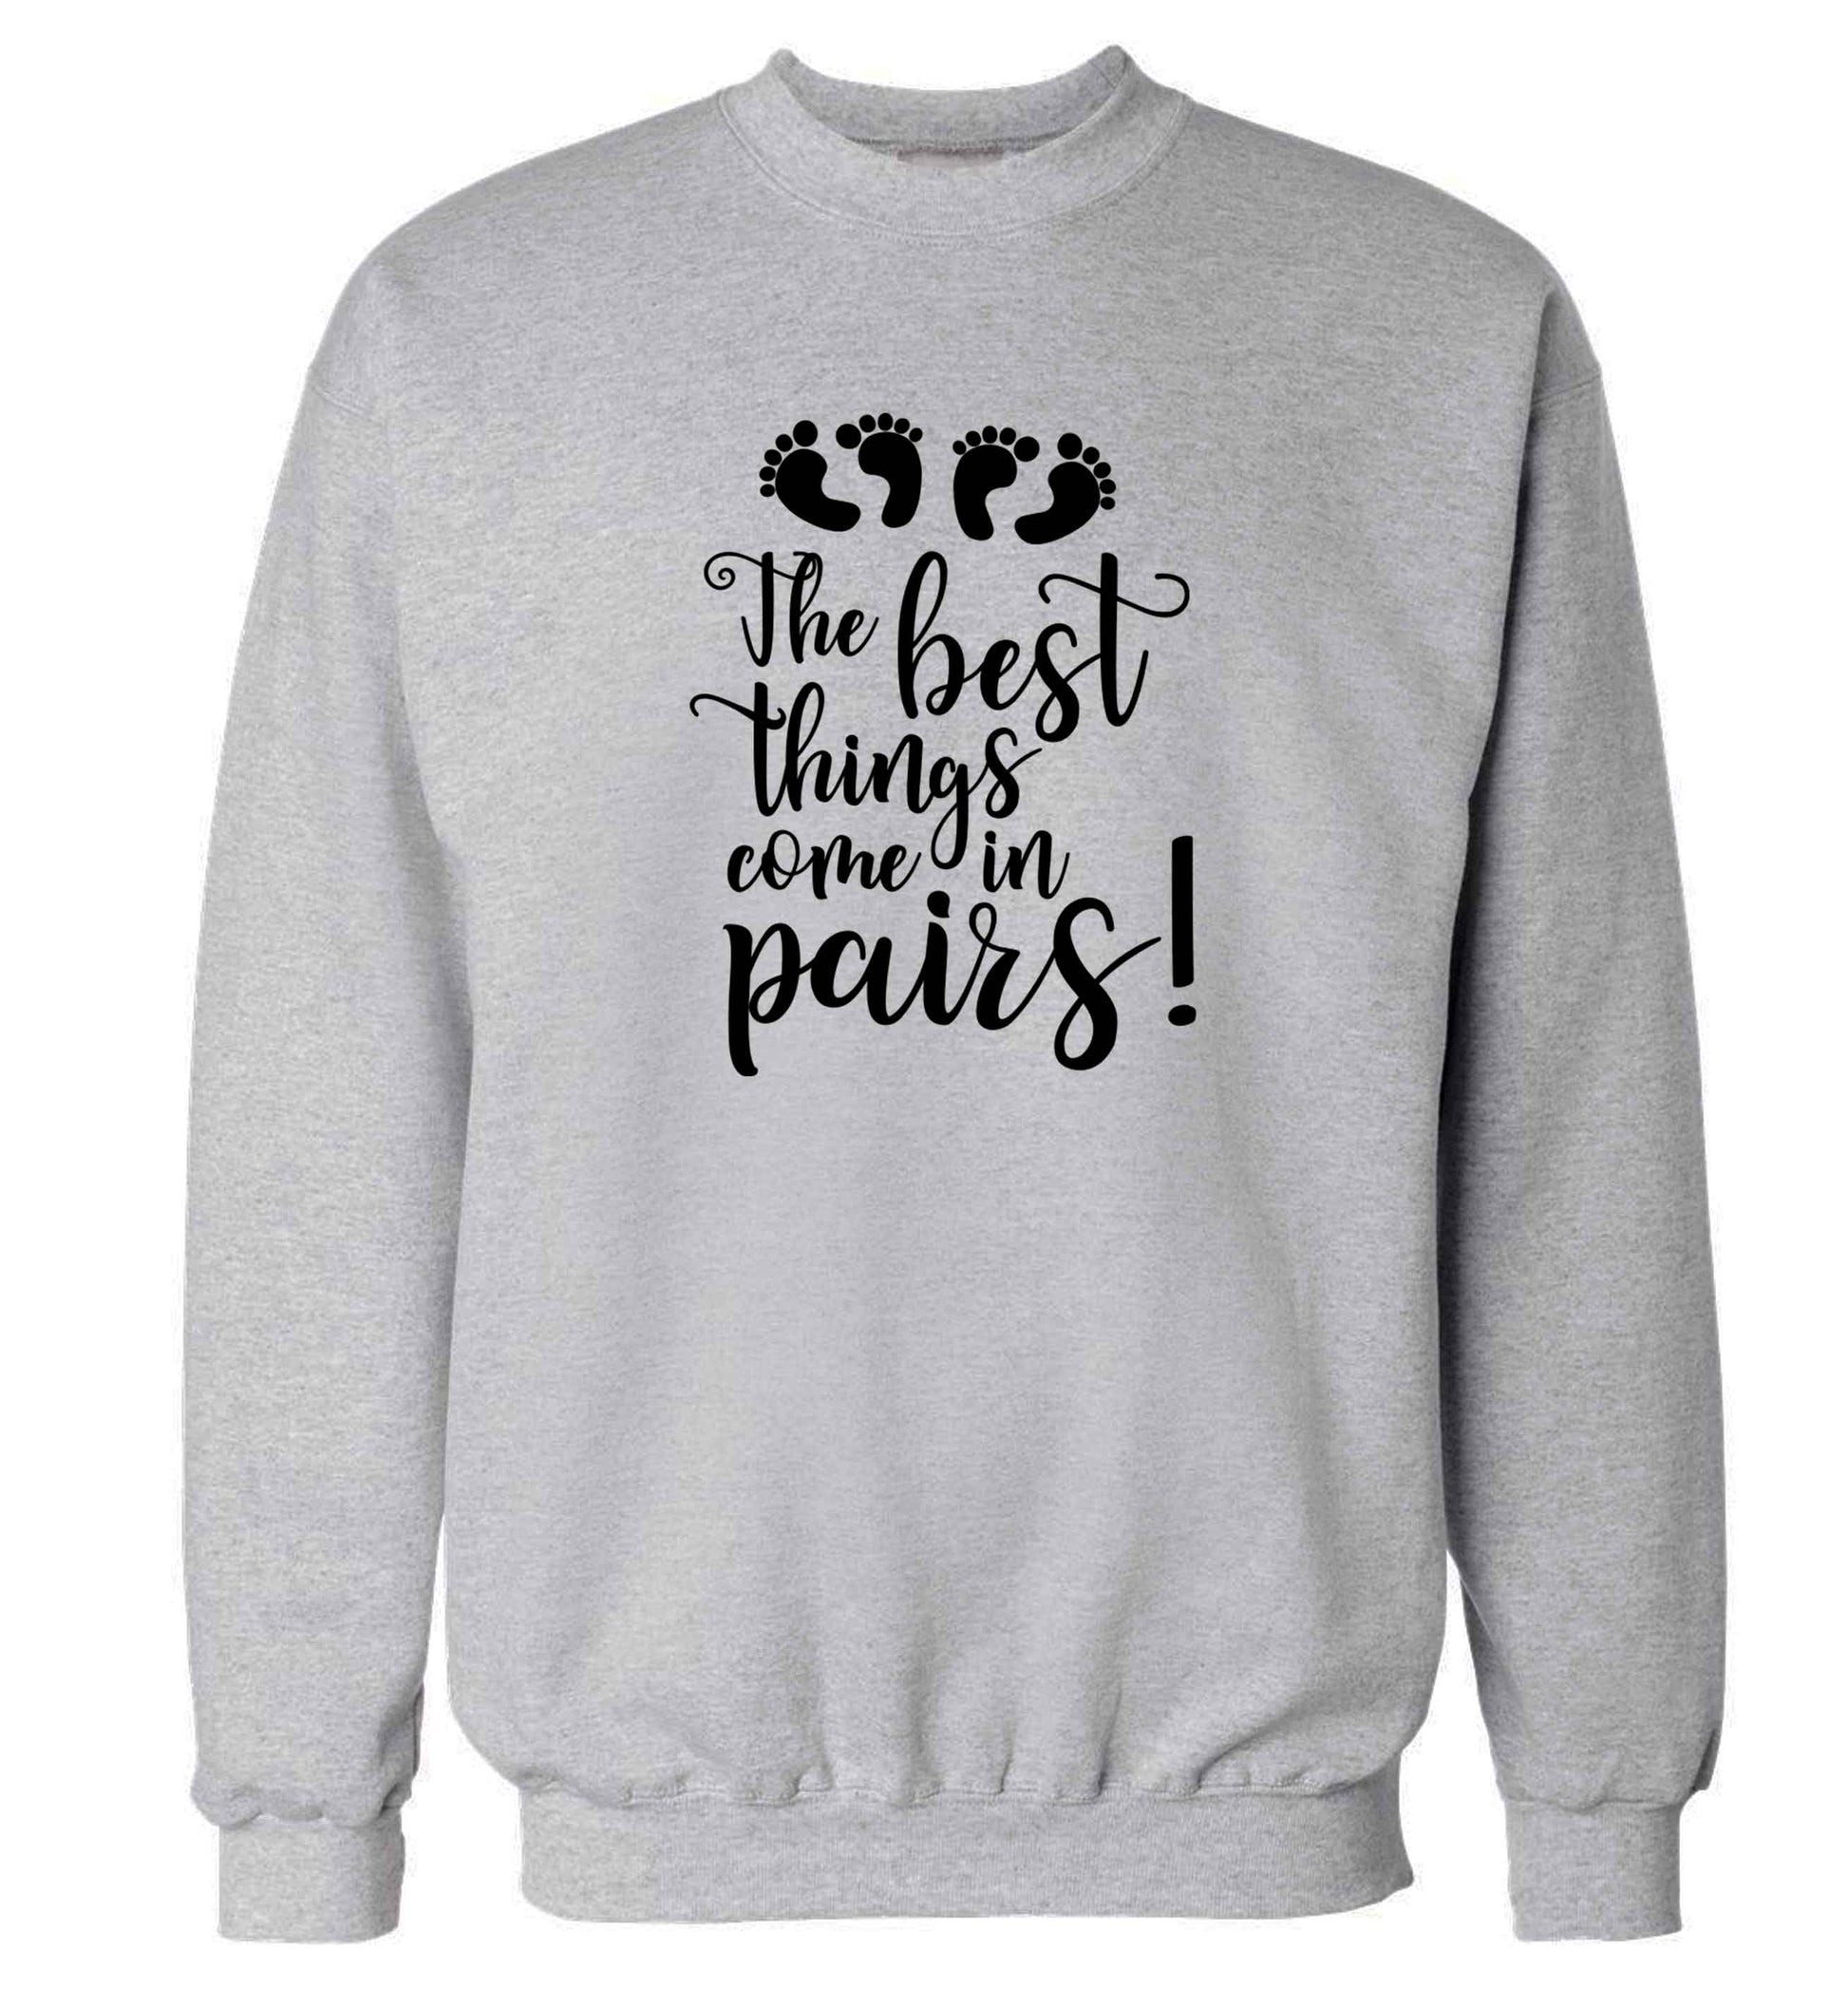 The best things come in pairs! adult's unisex grey sweater 2XL